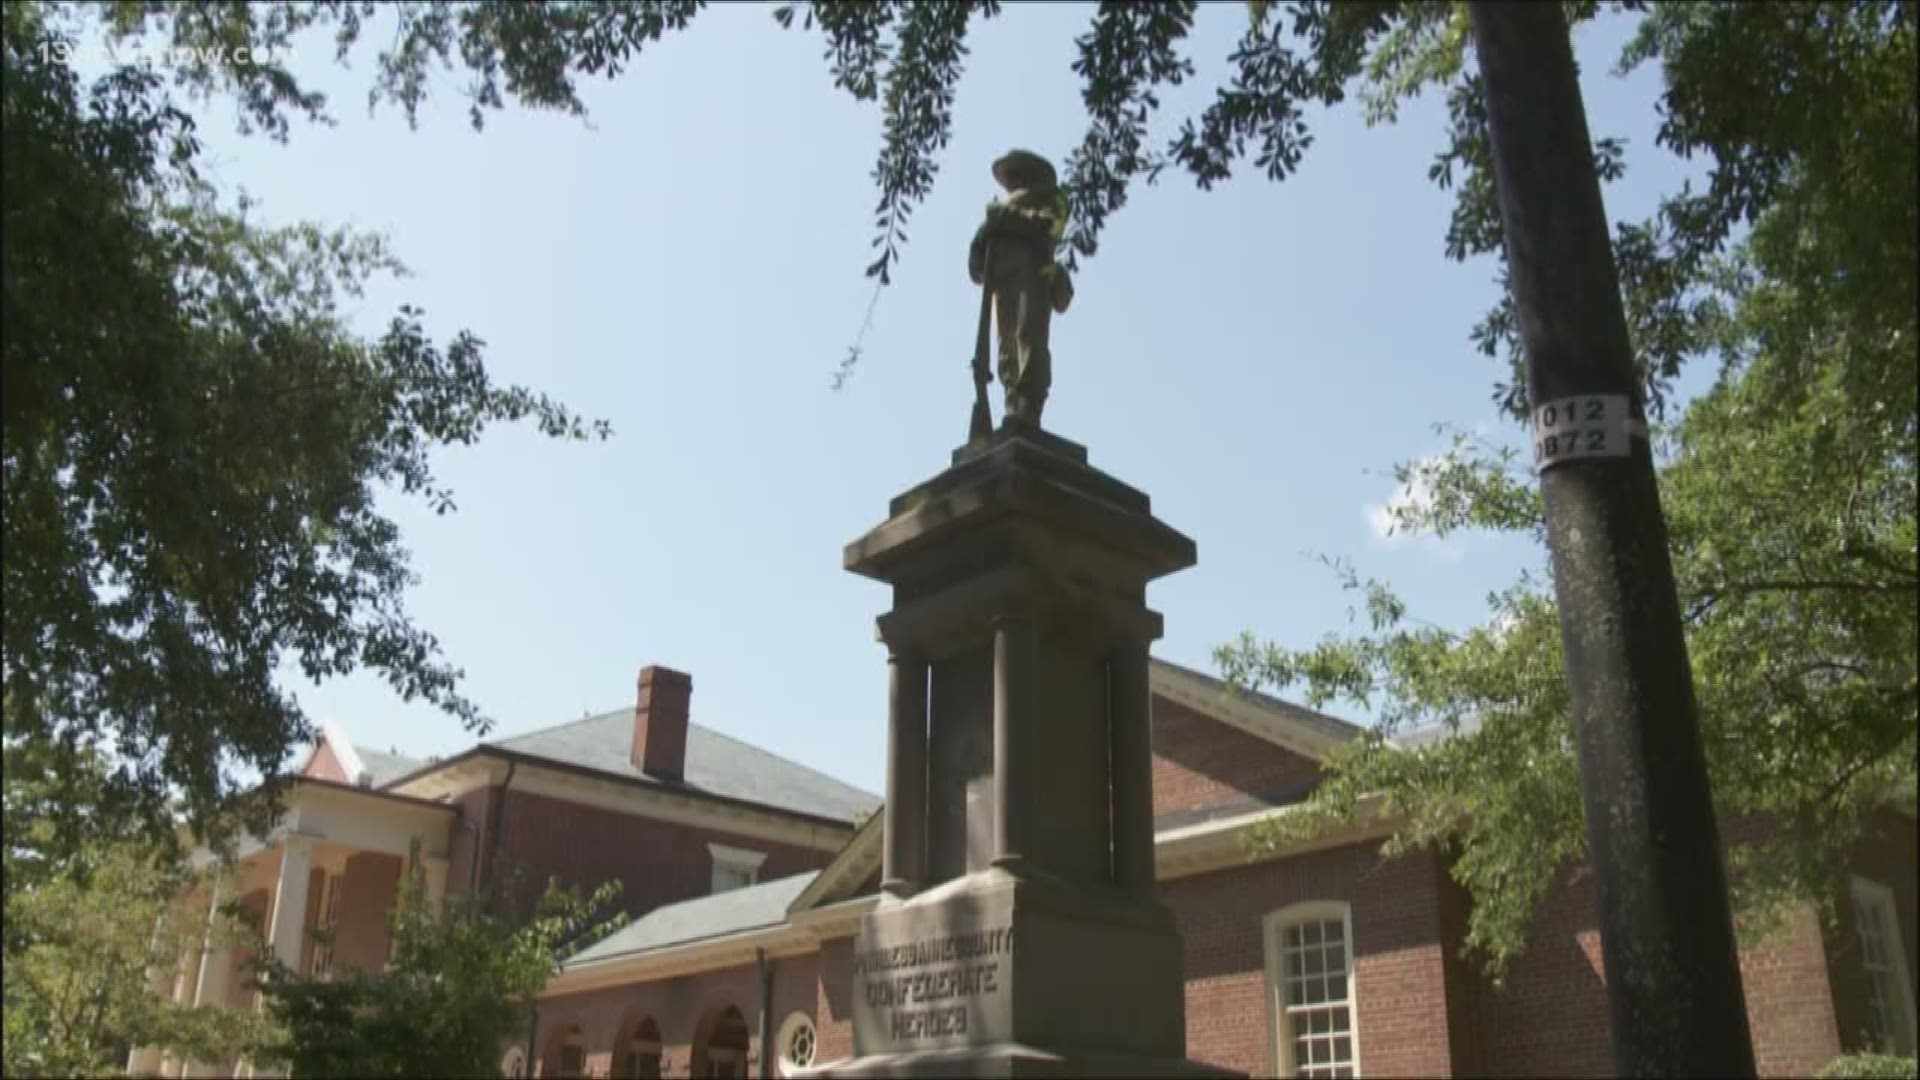 The Historic Preservation Commission is looking at ways to add historical context for the statue, which is located at the Municipal Center off Princess Anne Road.